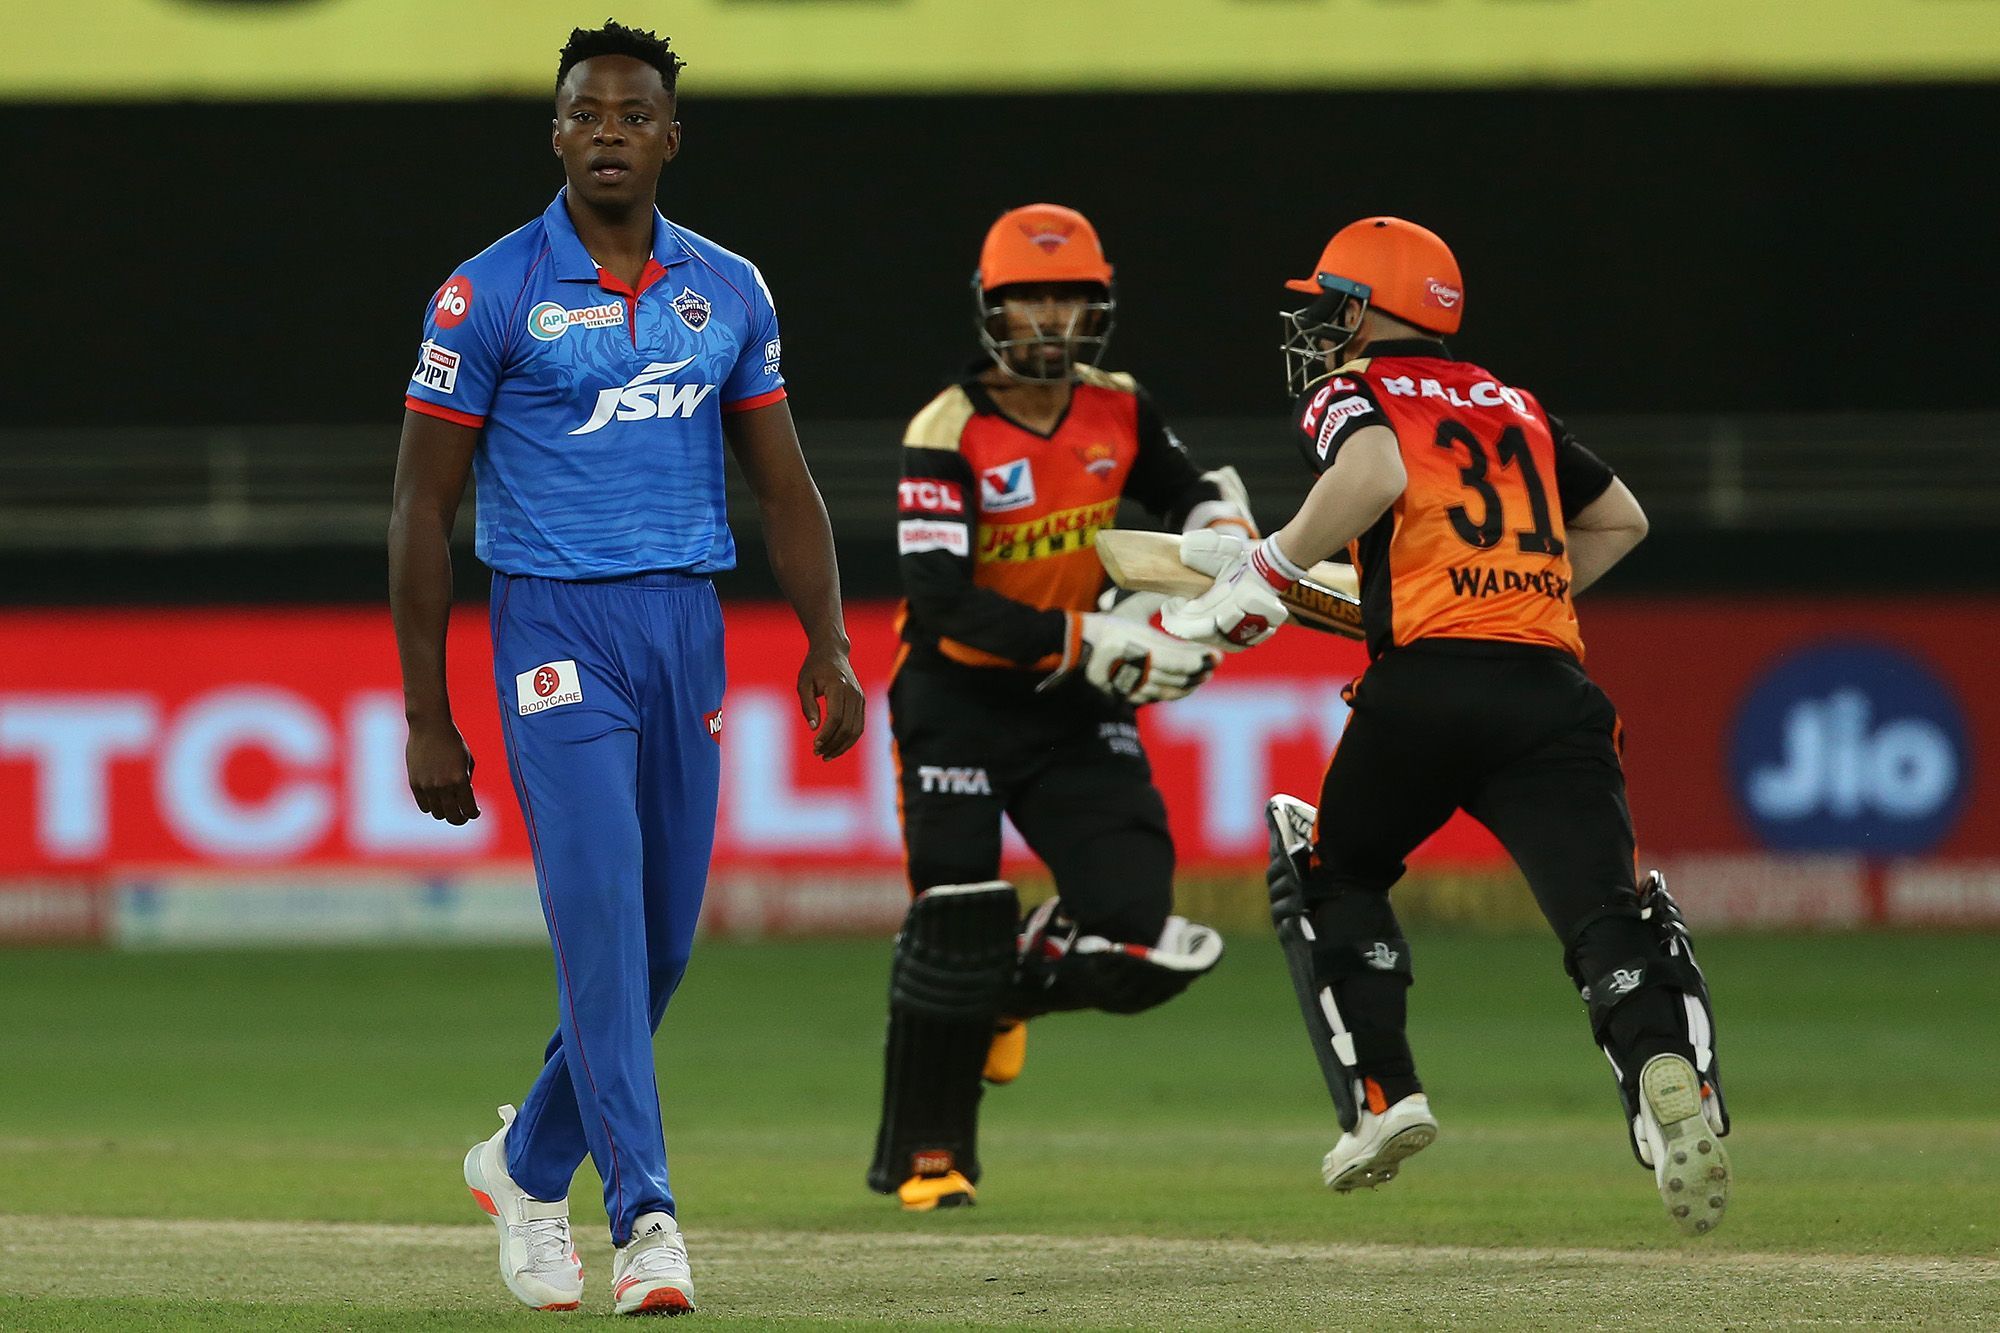 Rabada wicketless for the first time in 26 innings IPL2020